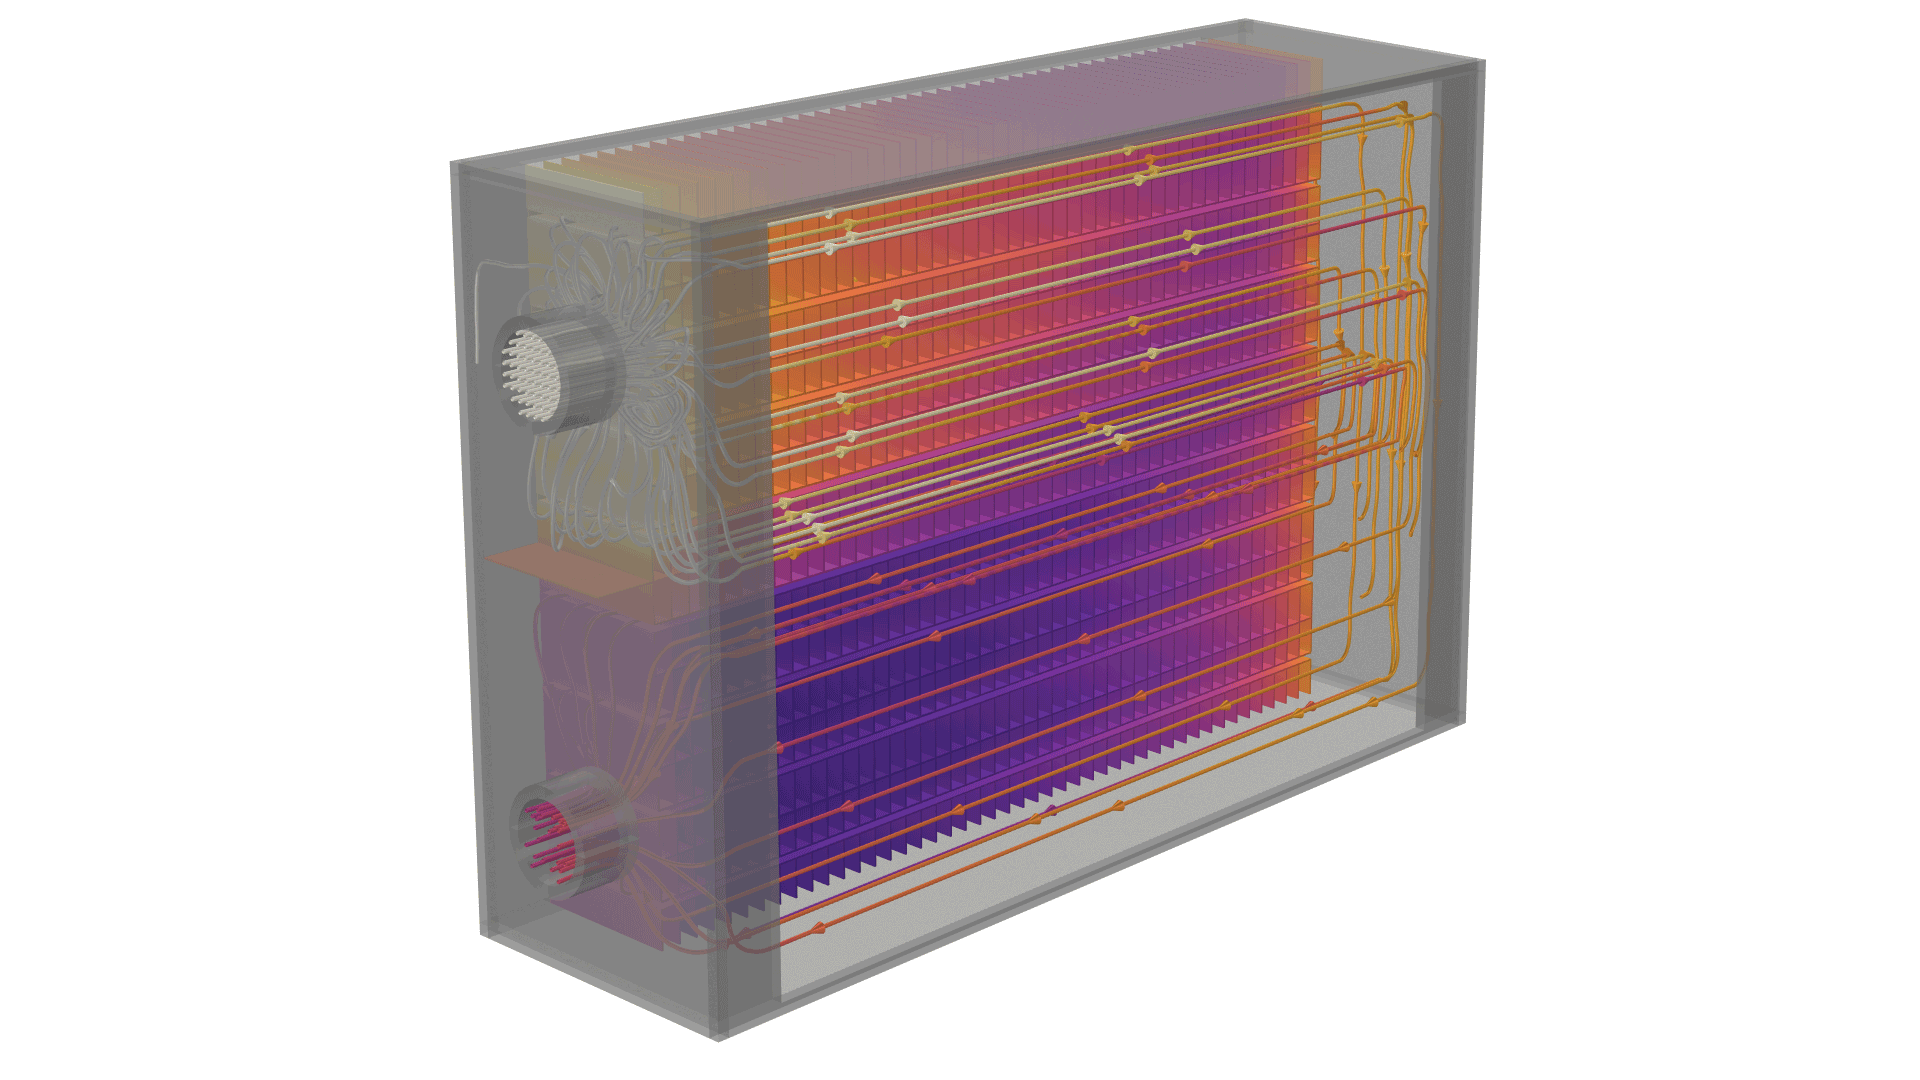 A heat exchanger model showing the oil flow and temperature in the Heat Camera color table.